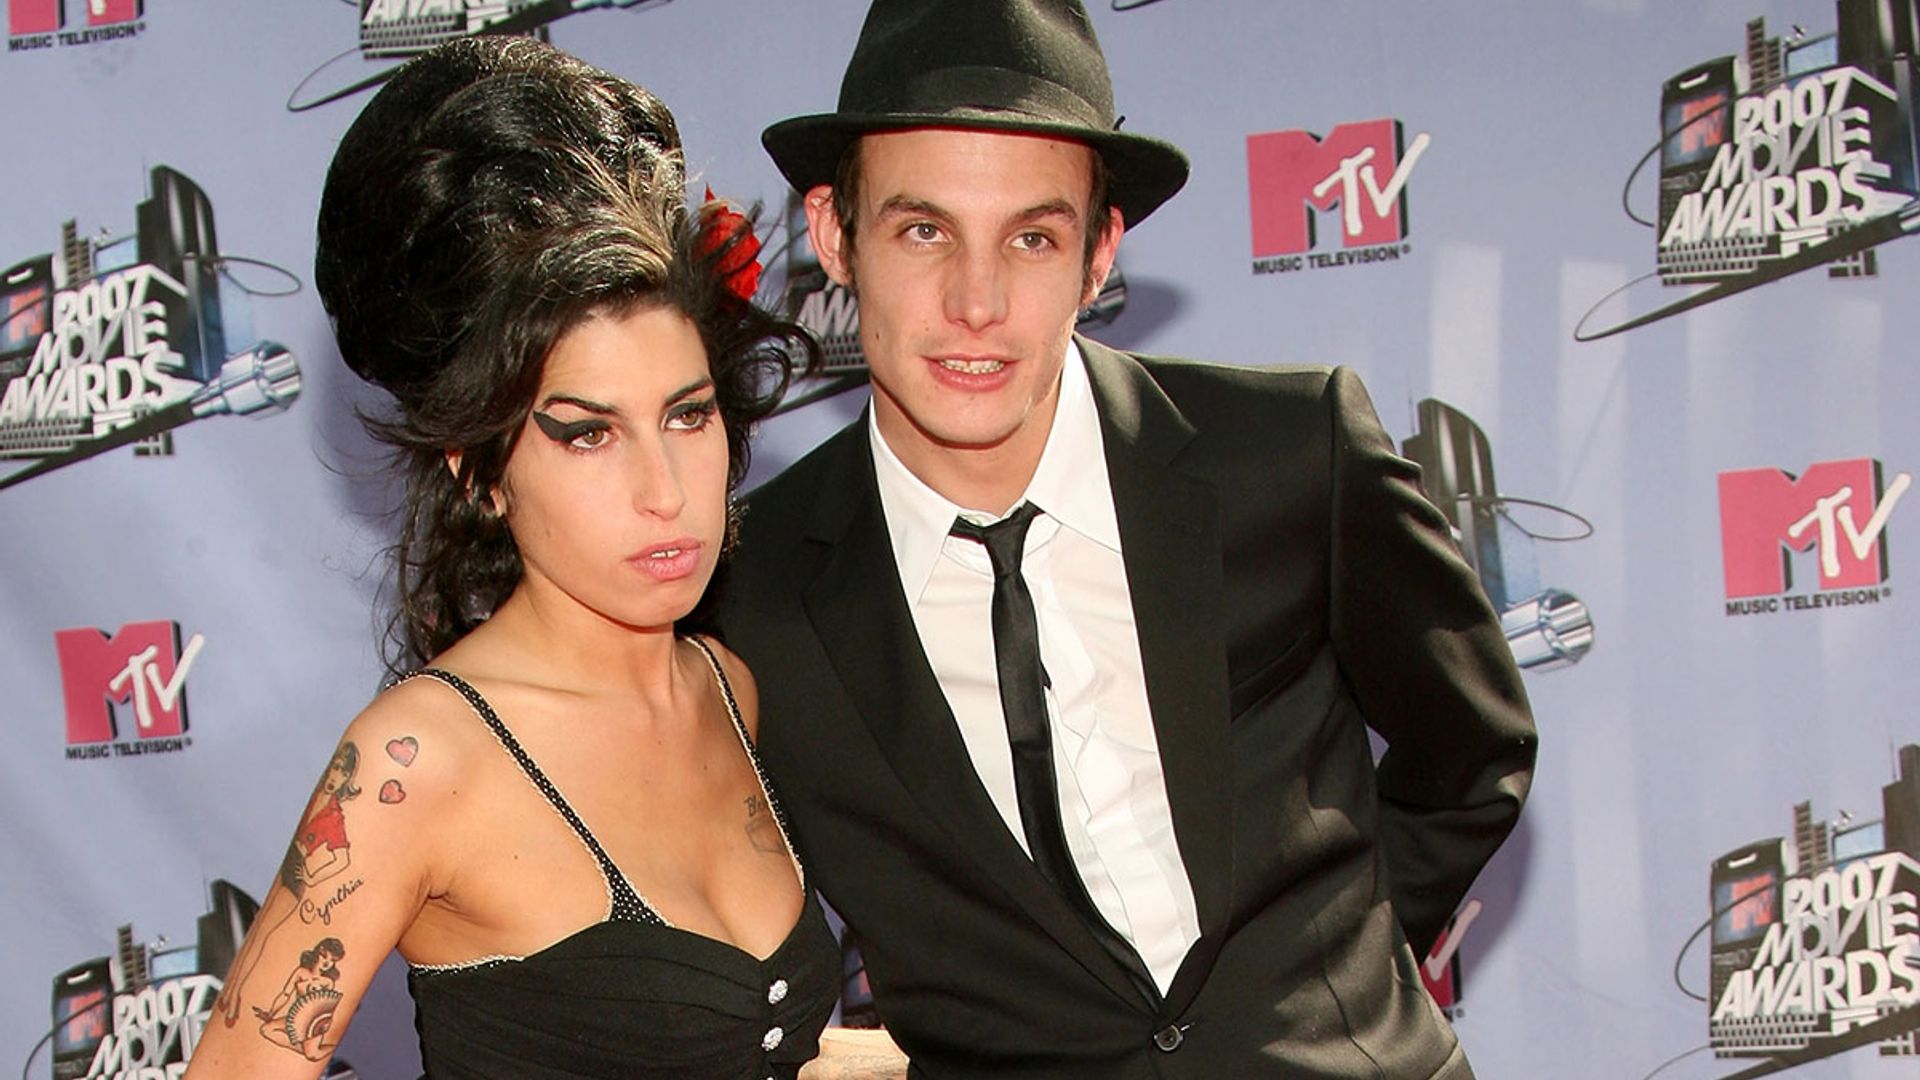 All you need to know about Amy Winehouse's love life ahead of new BBC documentary